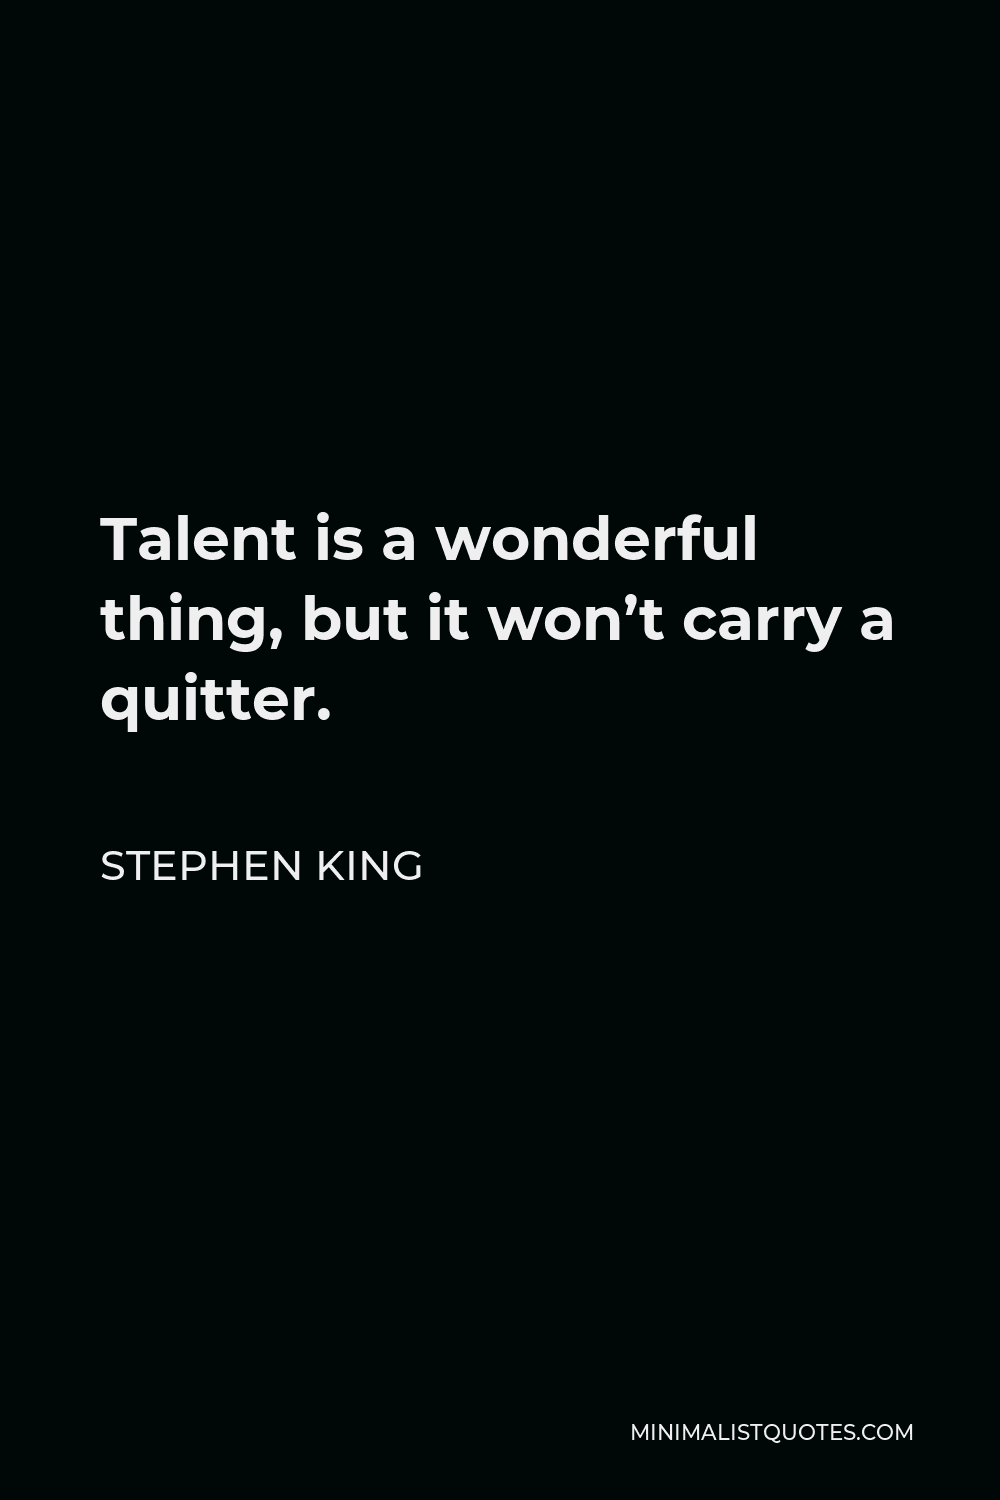 Stephen King Quote - Talent is a wonderful thing, but it won’t carry a quitter.